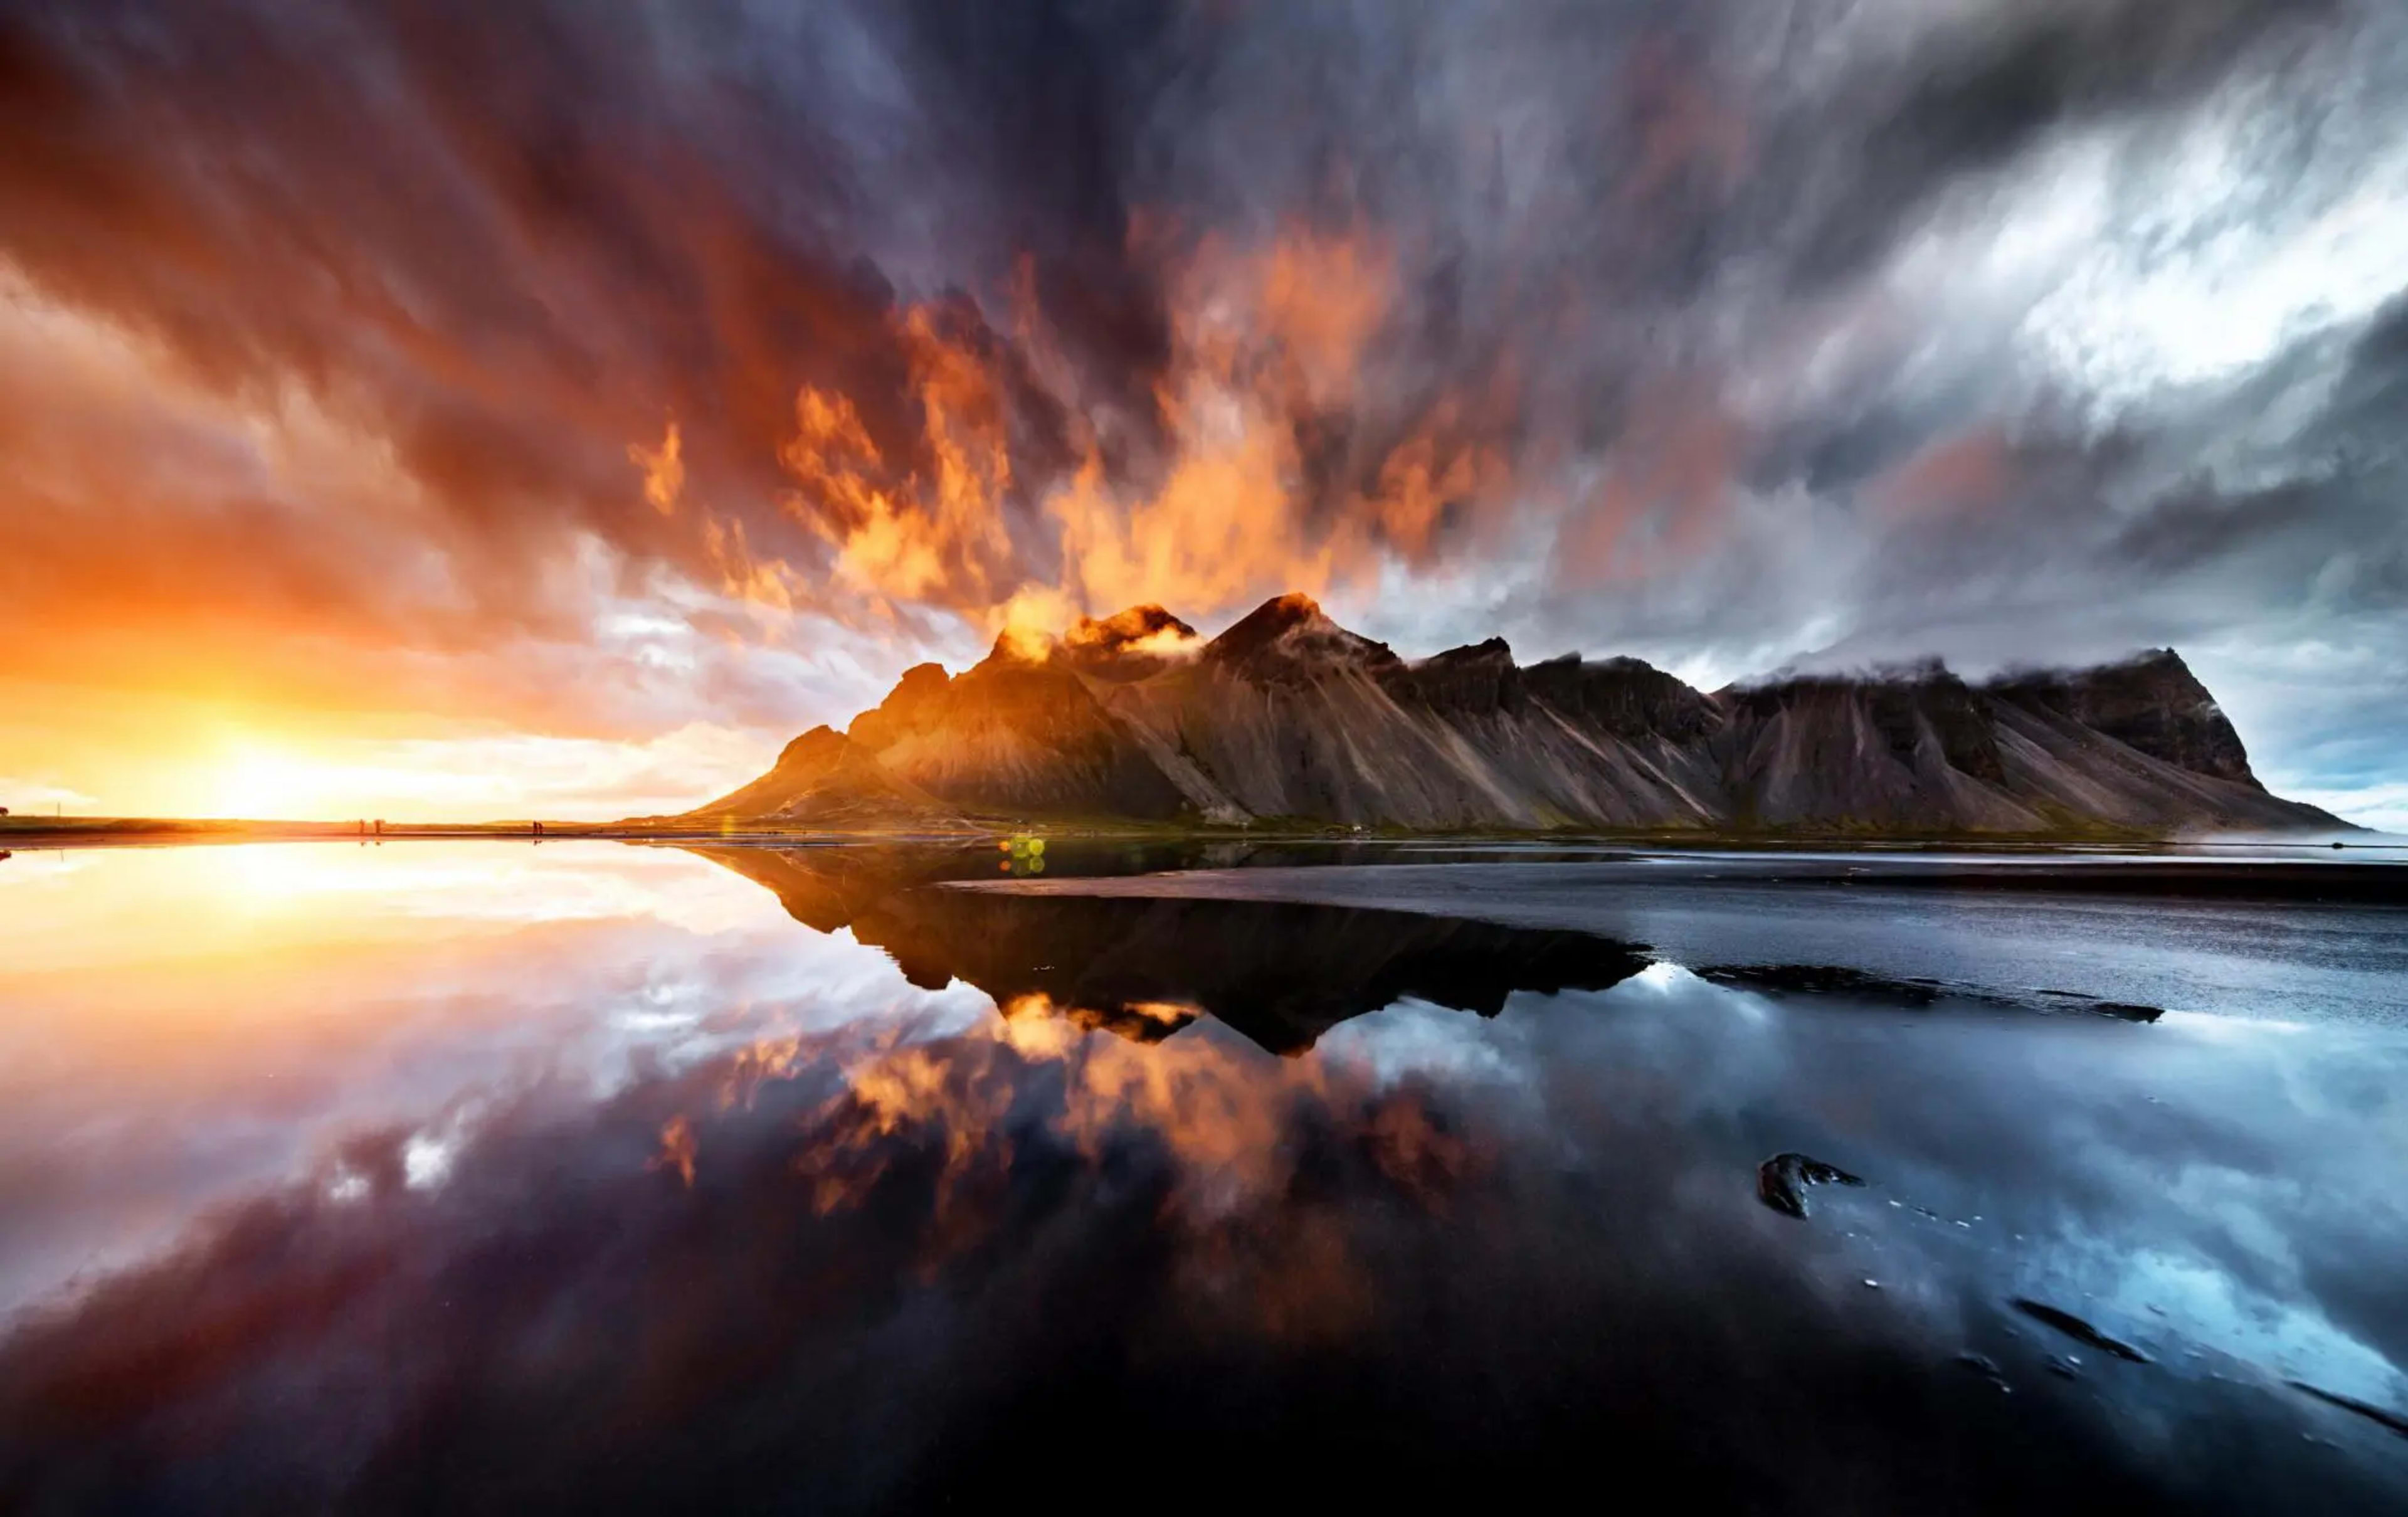 Sunset and moody skies behind the Vestrahorn mountains